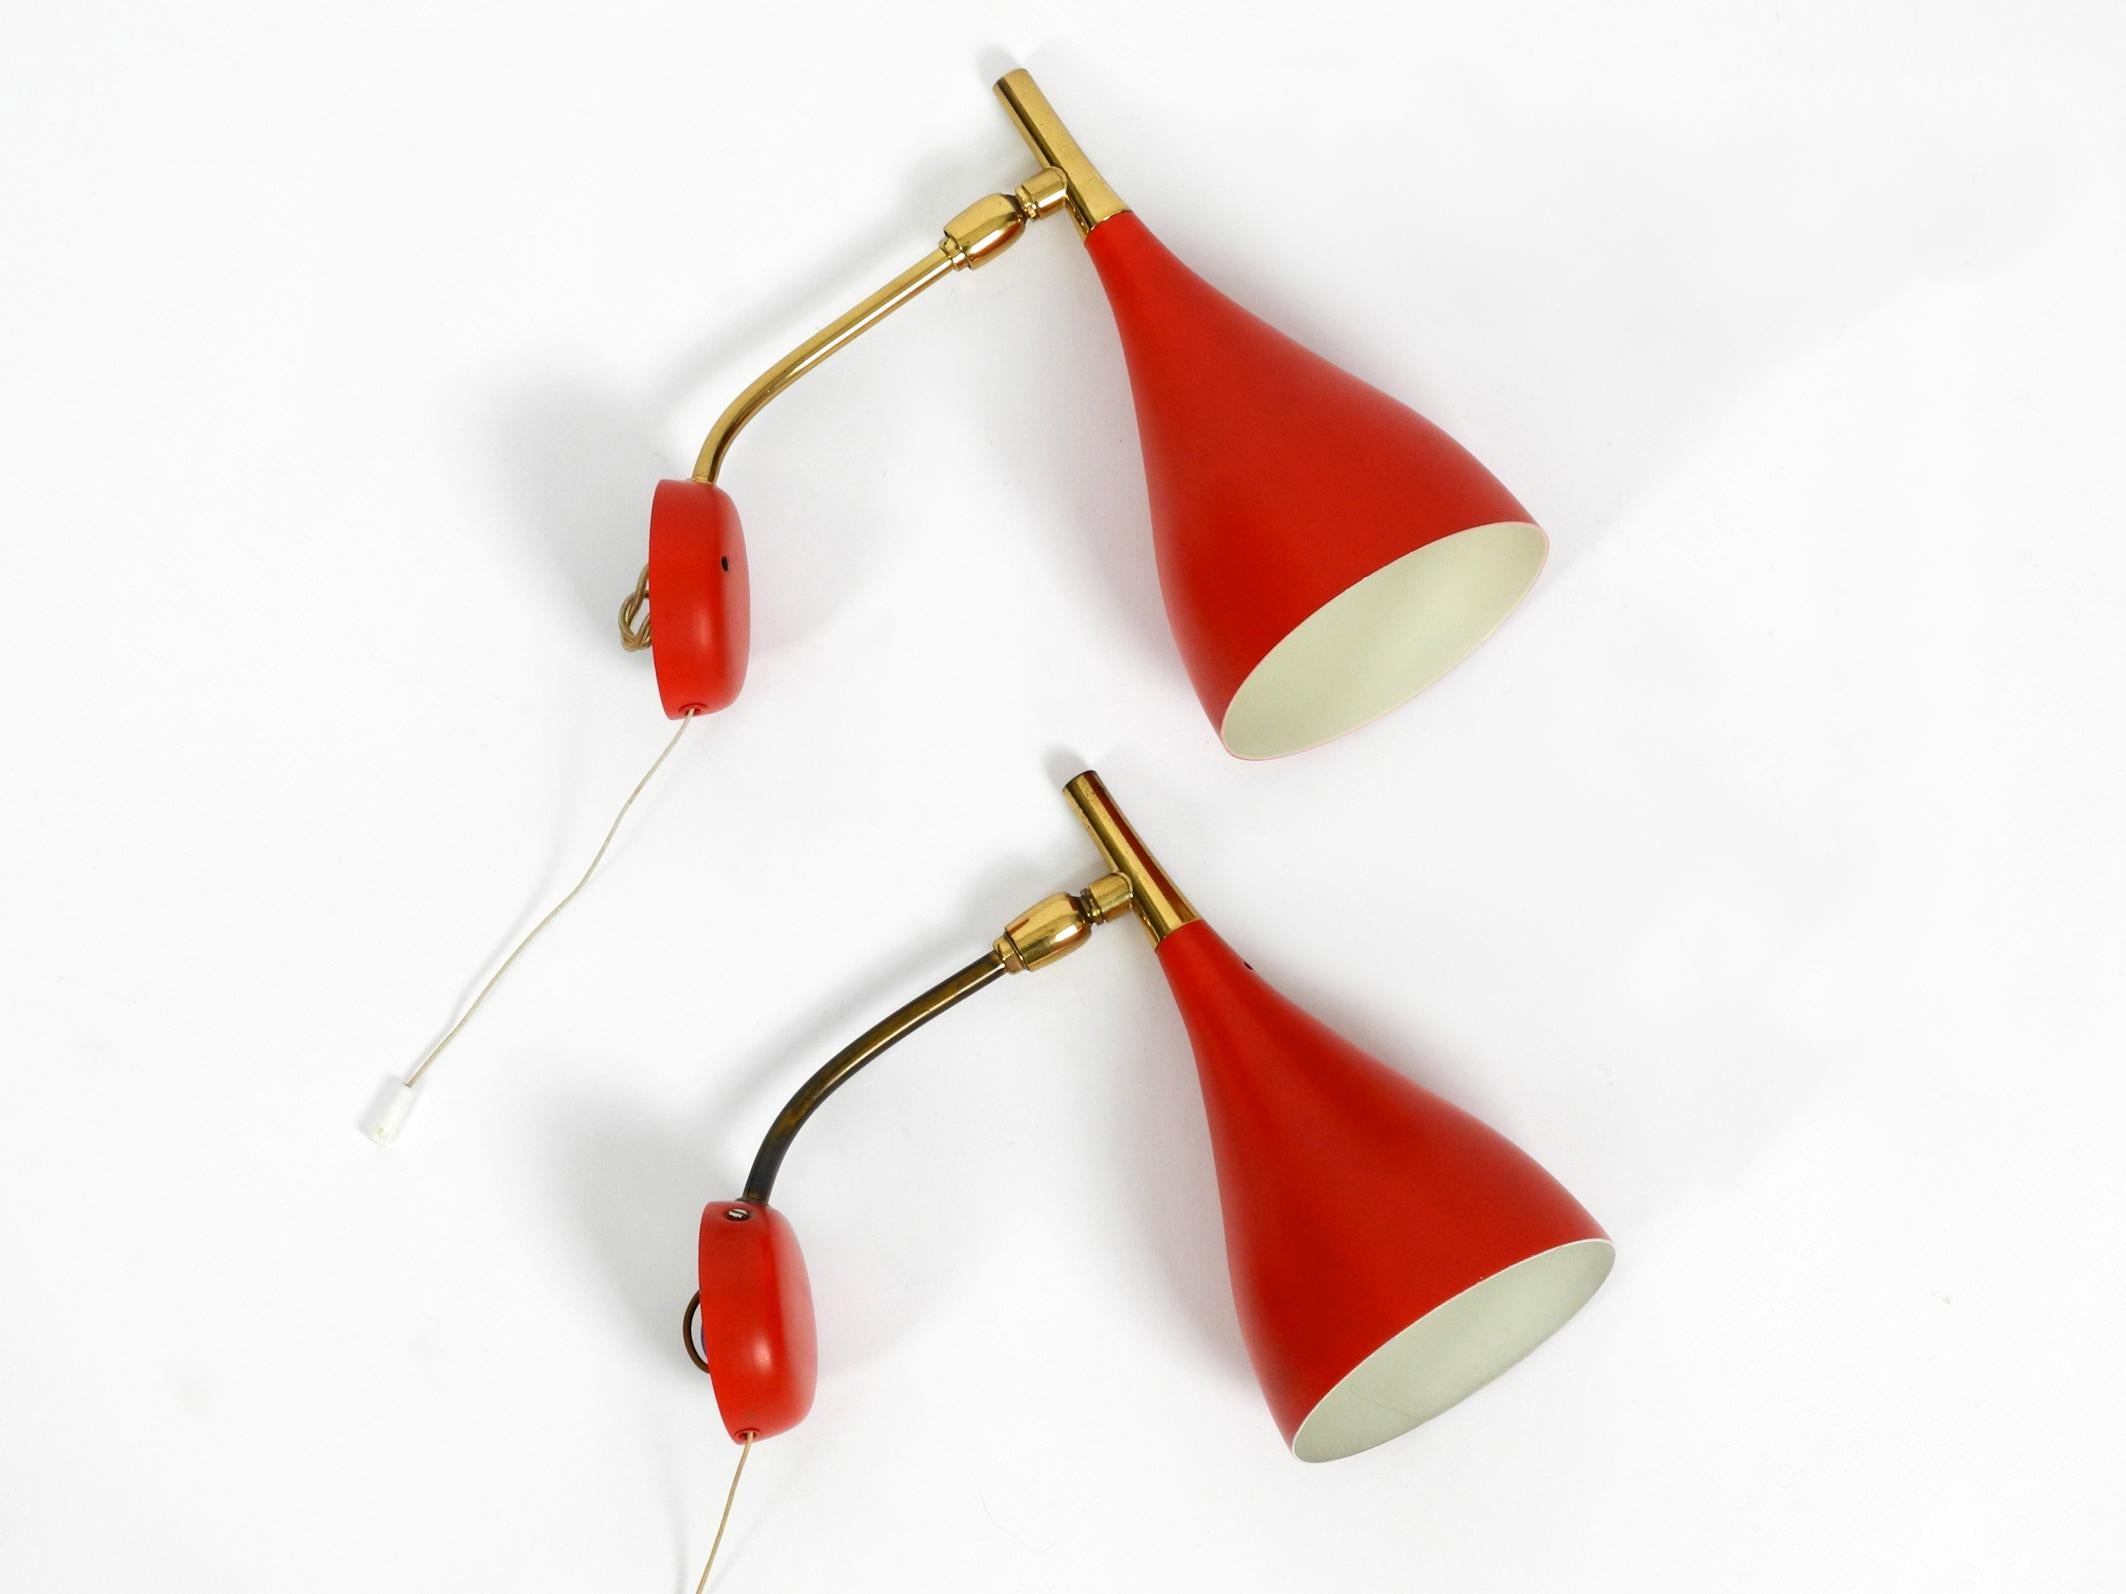 German Pair of Midcentury Wall Lights by Cosack with Original Red Lacquer